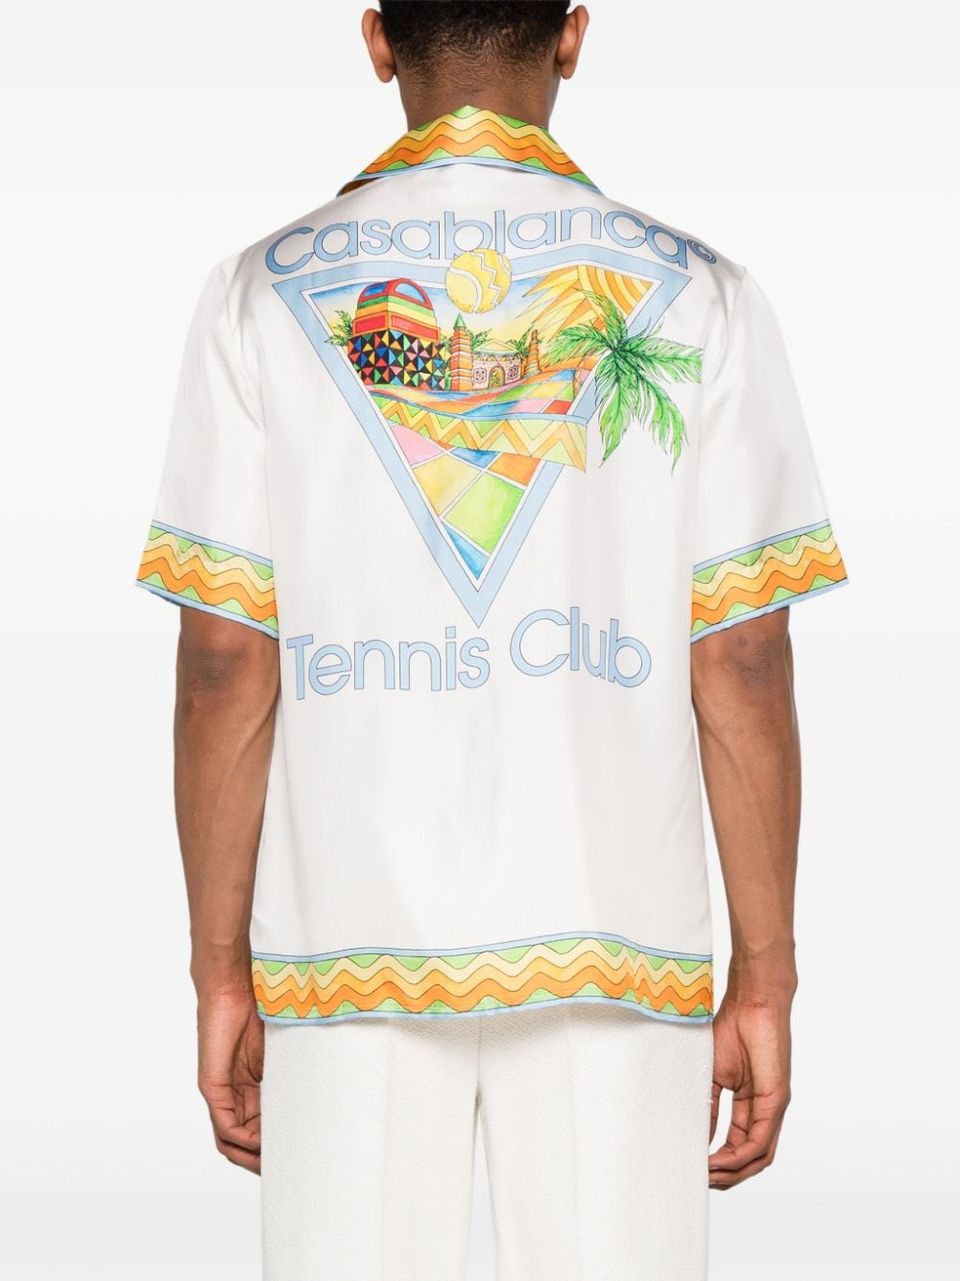 Afro Cubism Club shirt in satin